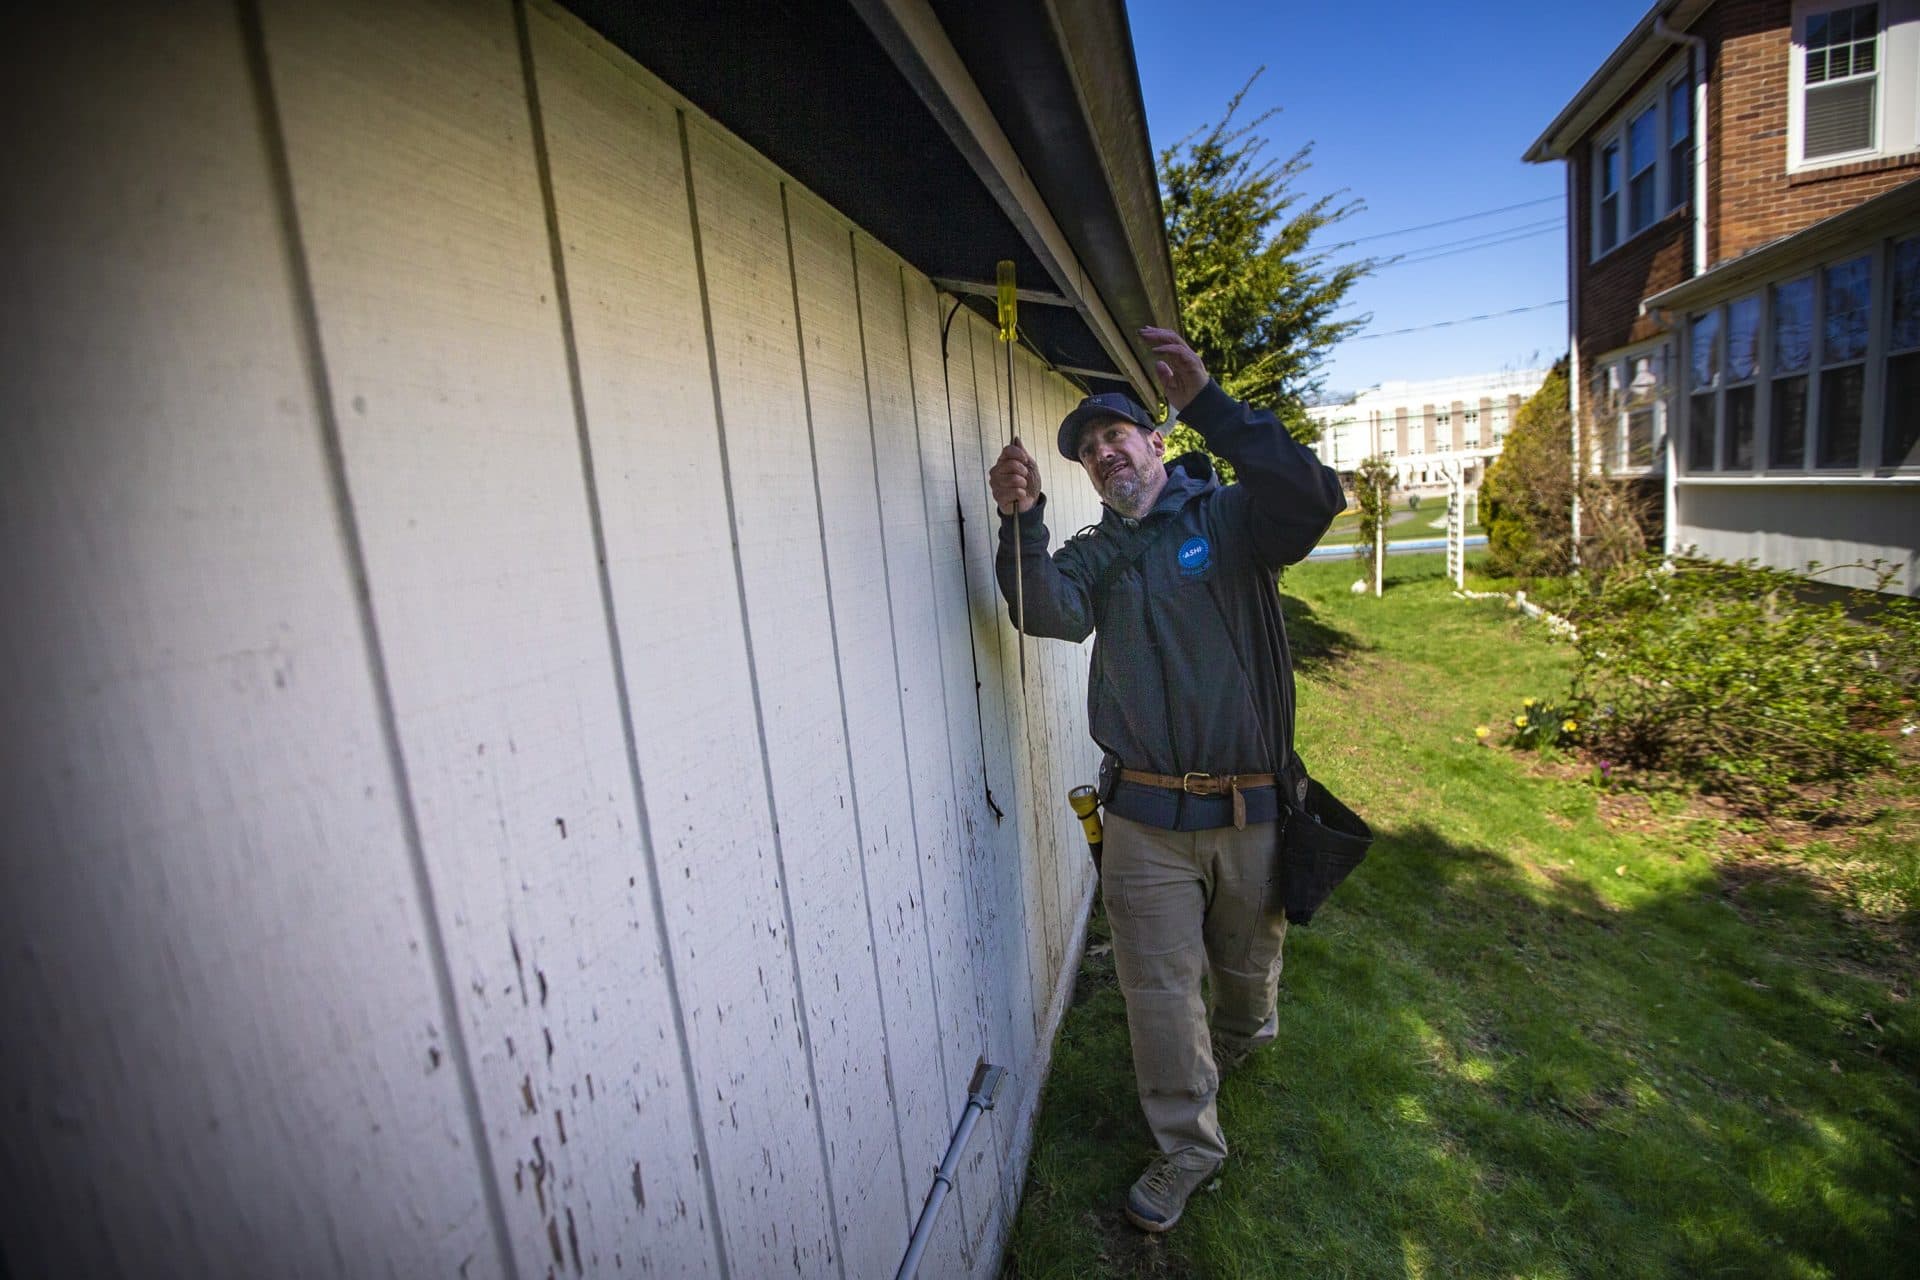 Alex Steinberg, of JBS Home Inspections, checks the underside of gutters during a home inspection in Newton.  (Jesse Costa/WBUR)